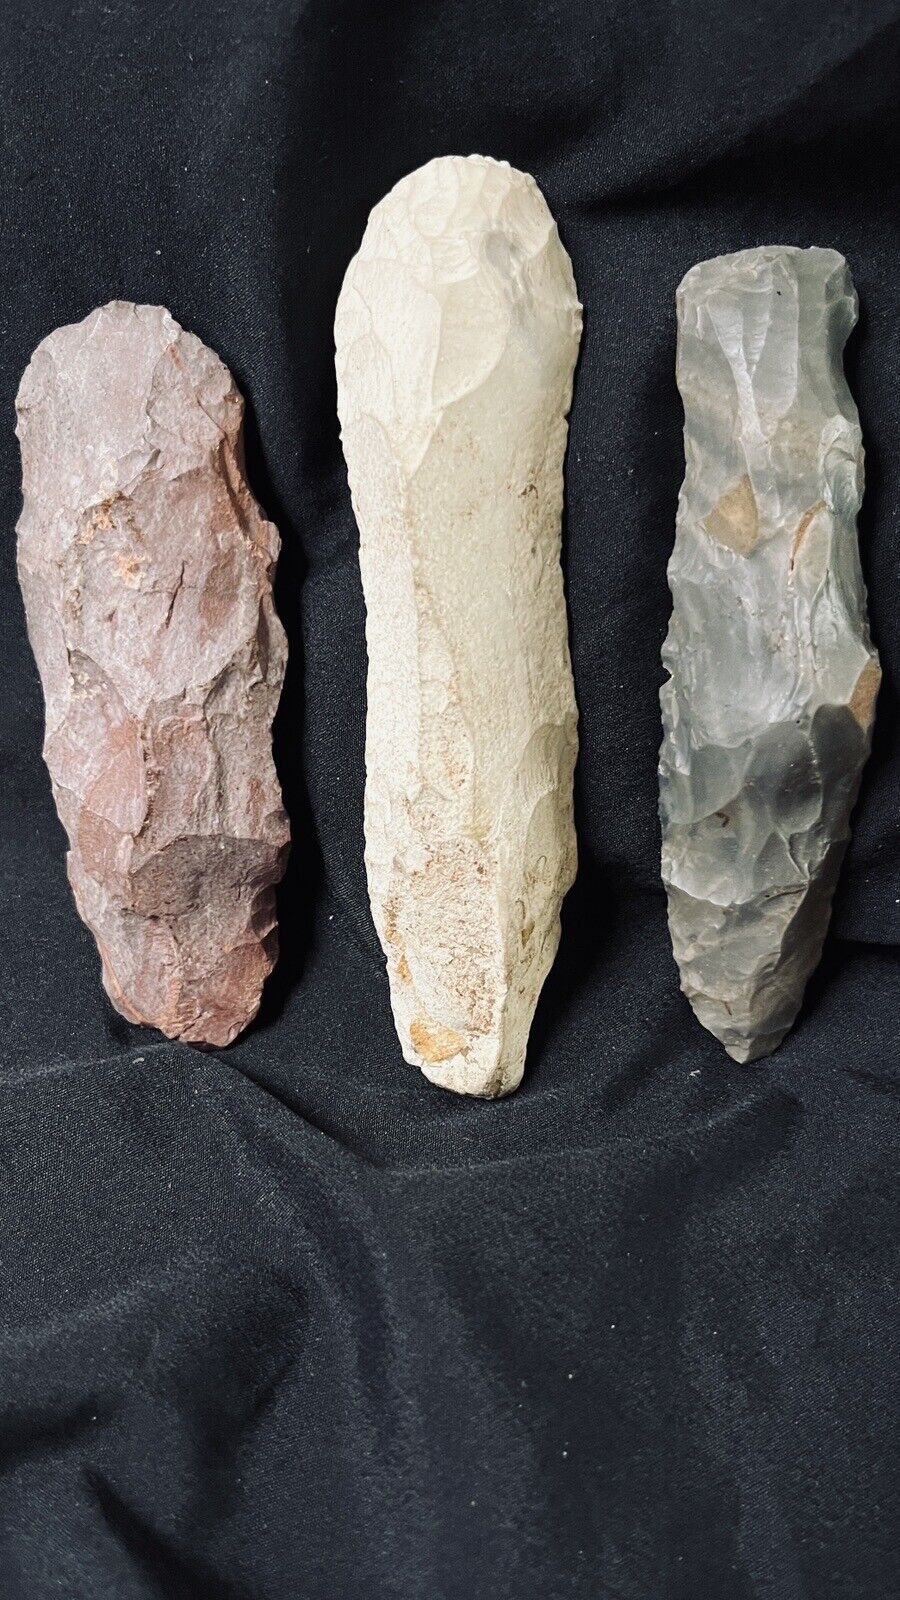 Native American Stone Tools, Neolithic Age, Lot Of 3 Chisel/End Scrapers